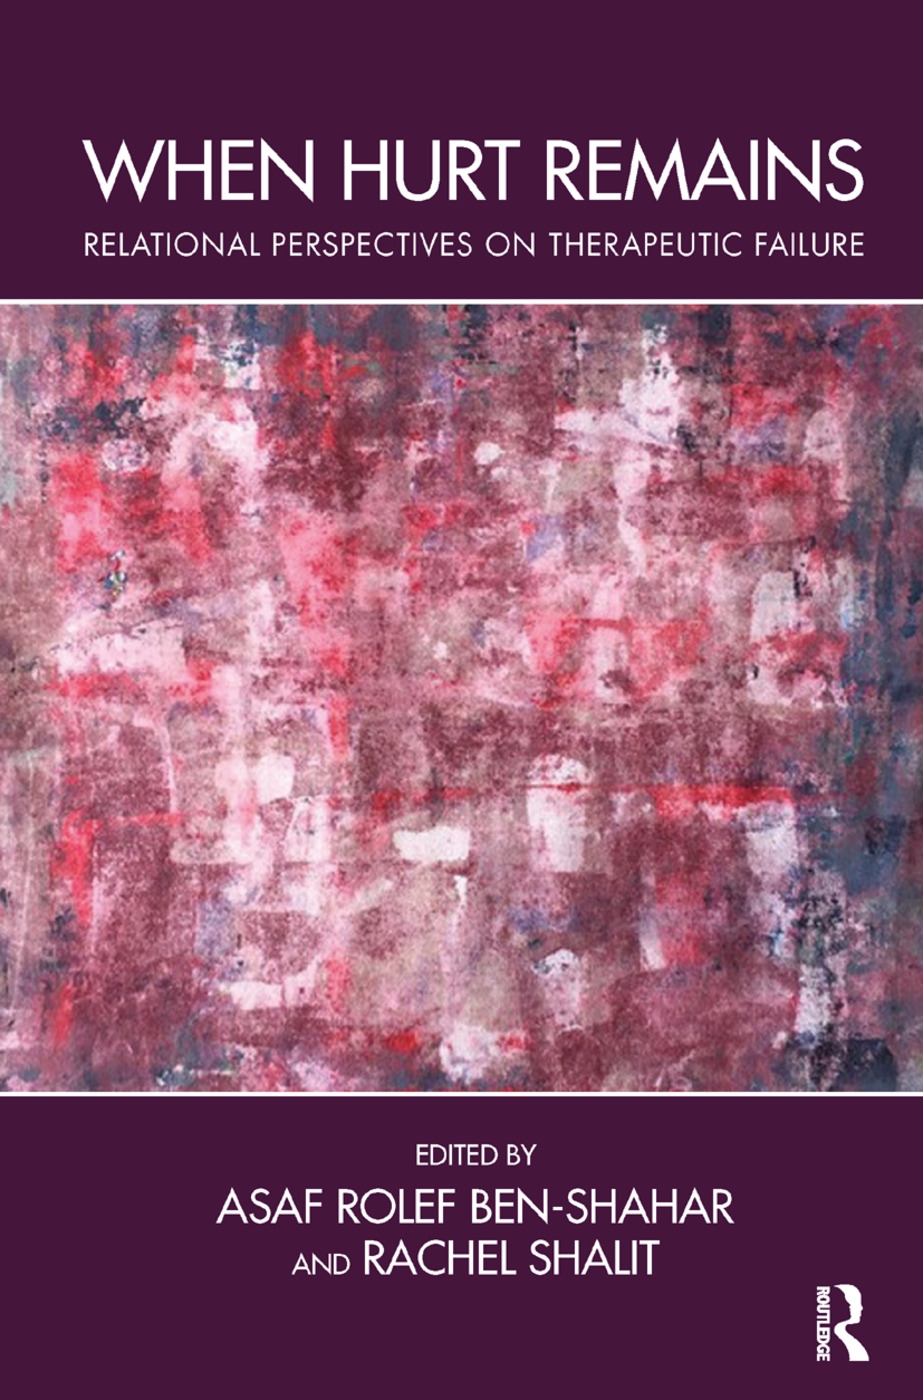 When Hurt Remains: Relational Perspectives on Therapeutic Failure